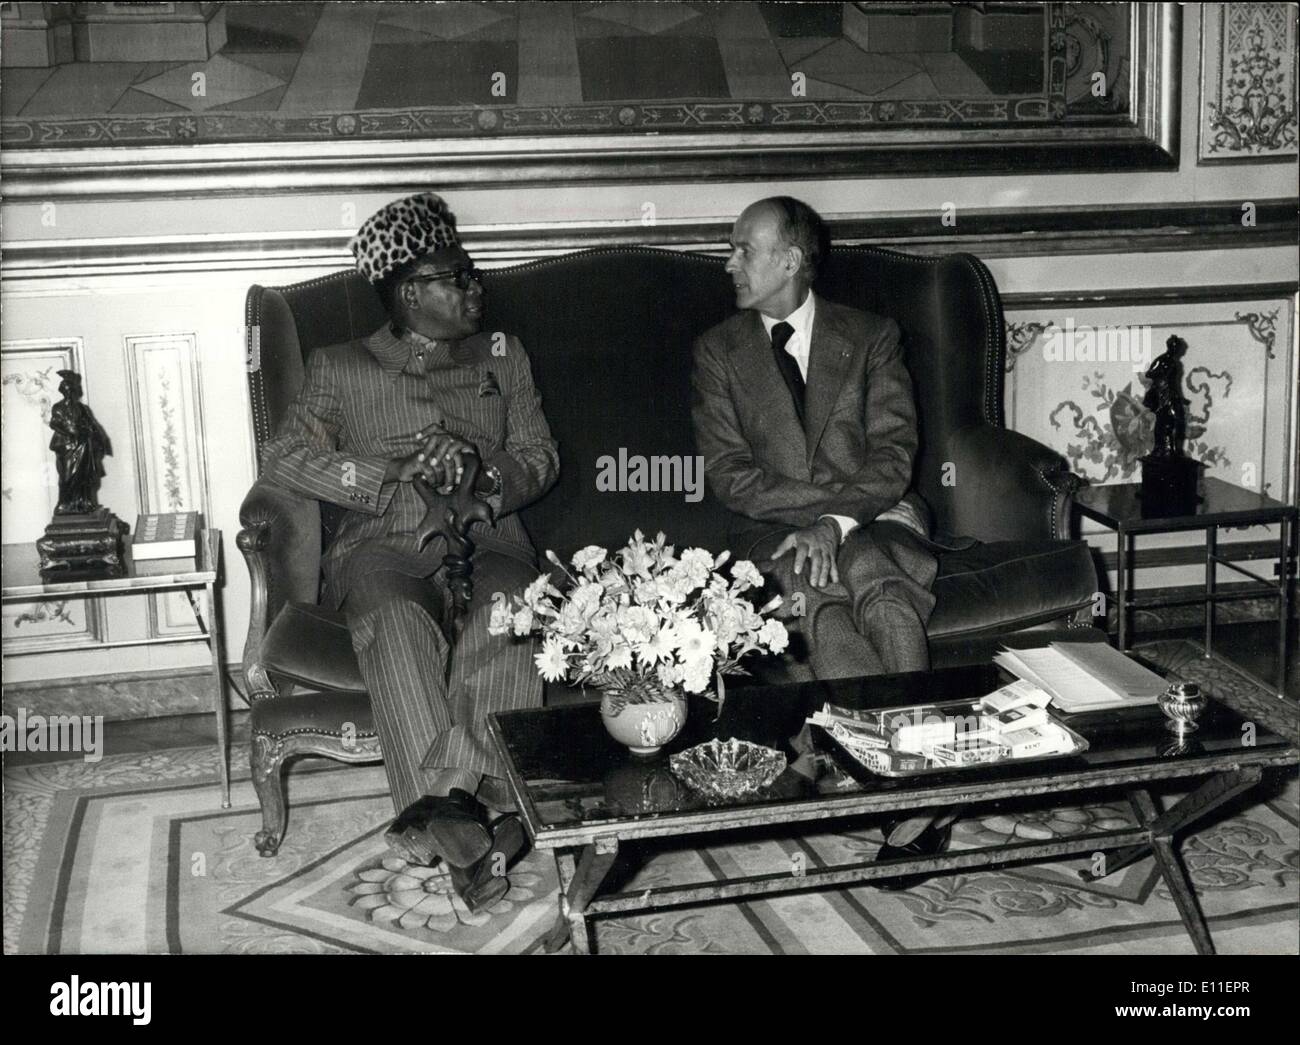 Jun. 10, 1977 - Zaire's President Mobutu Sese Seko met with the French President at the Elysee Palace while in France on business for two days. He thanked the President for his help in the Sheba operation. French military planes transported material and Moroccan soldiers between Rabat and Kinshasa to help support Zaire in its fight against the mercenaries. Stock Photo